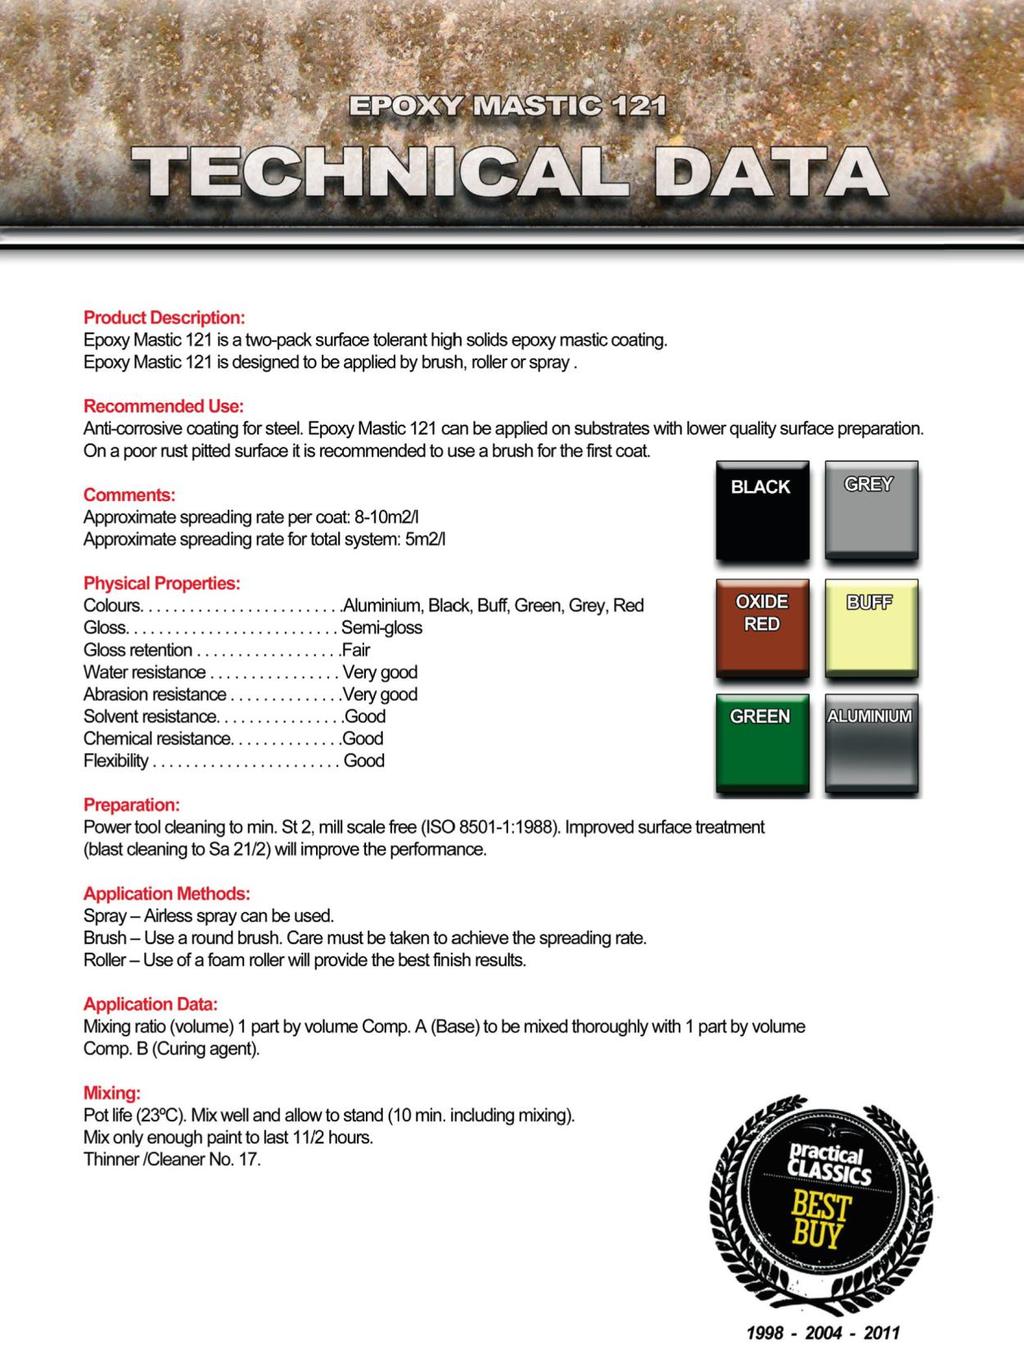 Full technical data sheet can be downloaded from derust.com.au/store/tech_info.